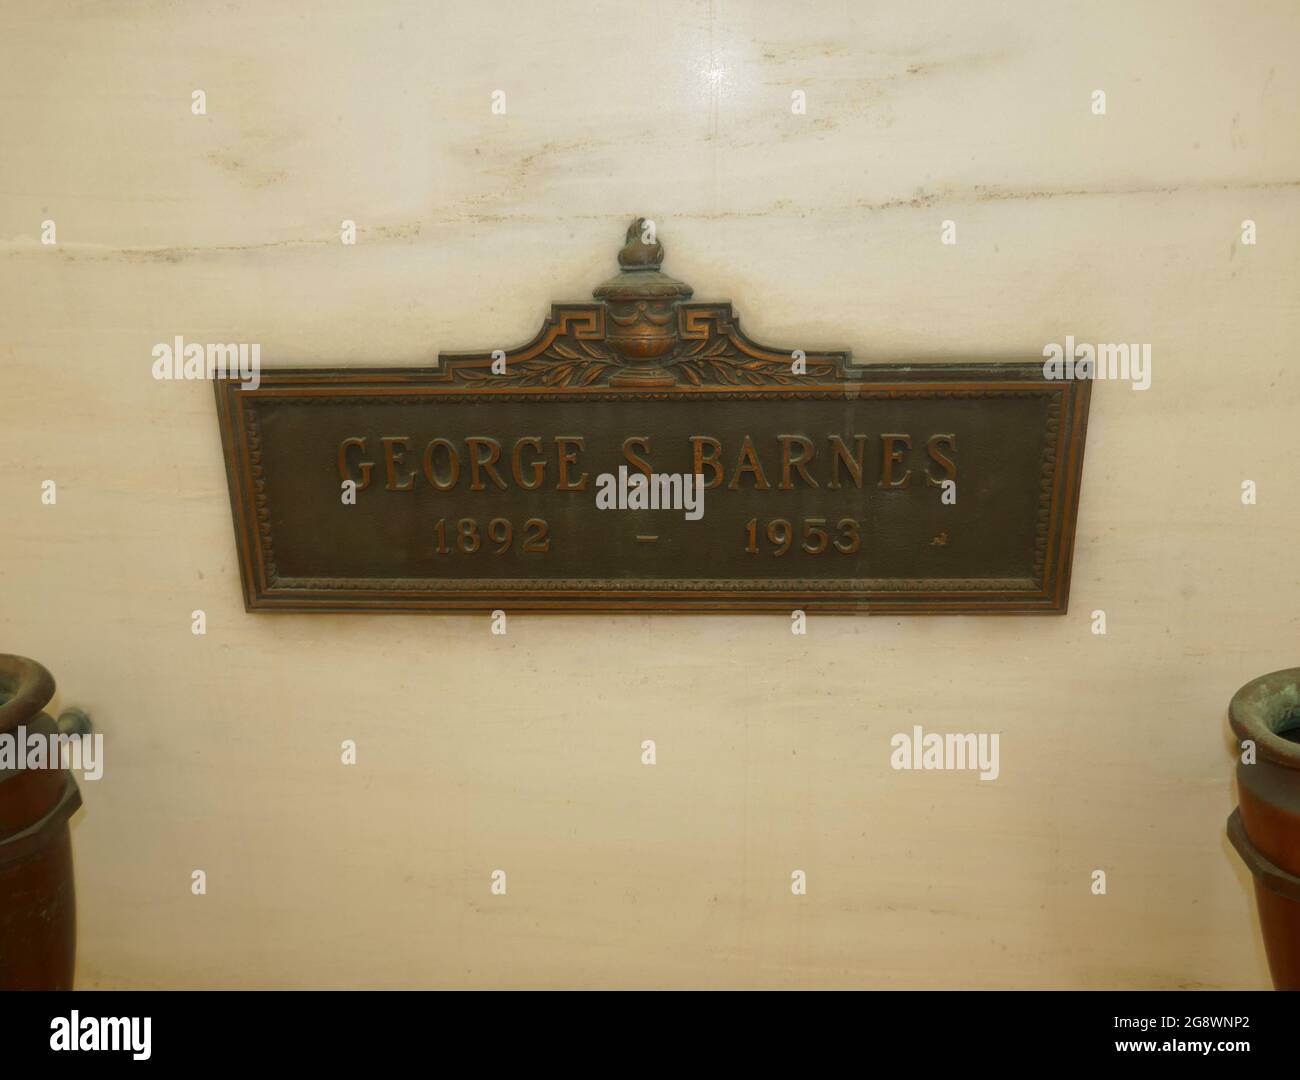 Los Angeles, California, USA 21st July 2021 A general view of atmosphere cinematographer George Barnes Grave in Abbey of the Psalms at Hollywood Forever Cemetery on July 21, 2021 in Los Angeles, California, USA. Photo by Barry King/Alamy Stock Photo Stock Photo